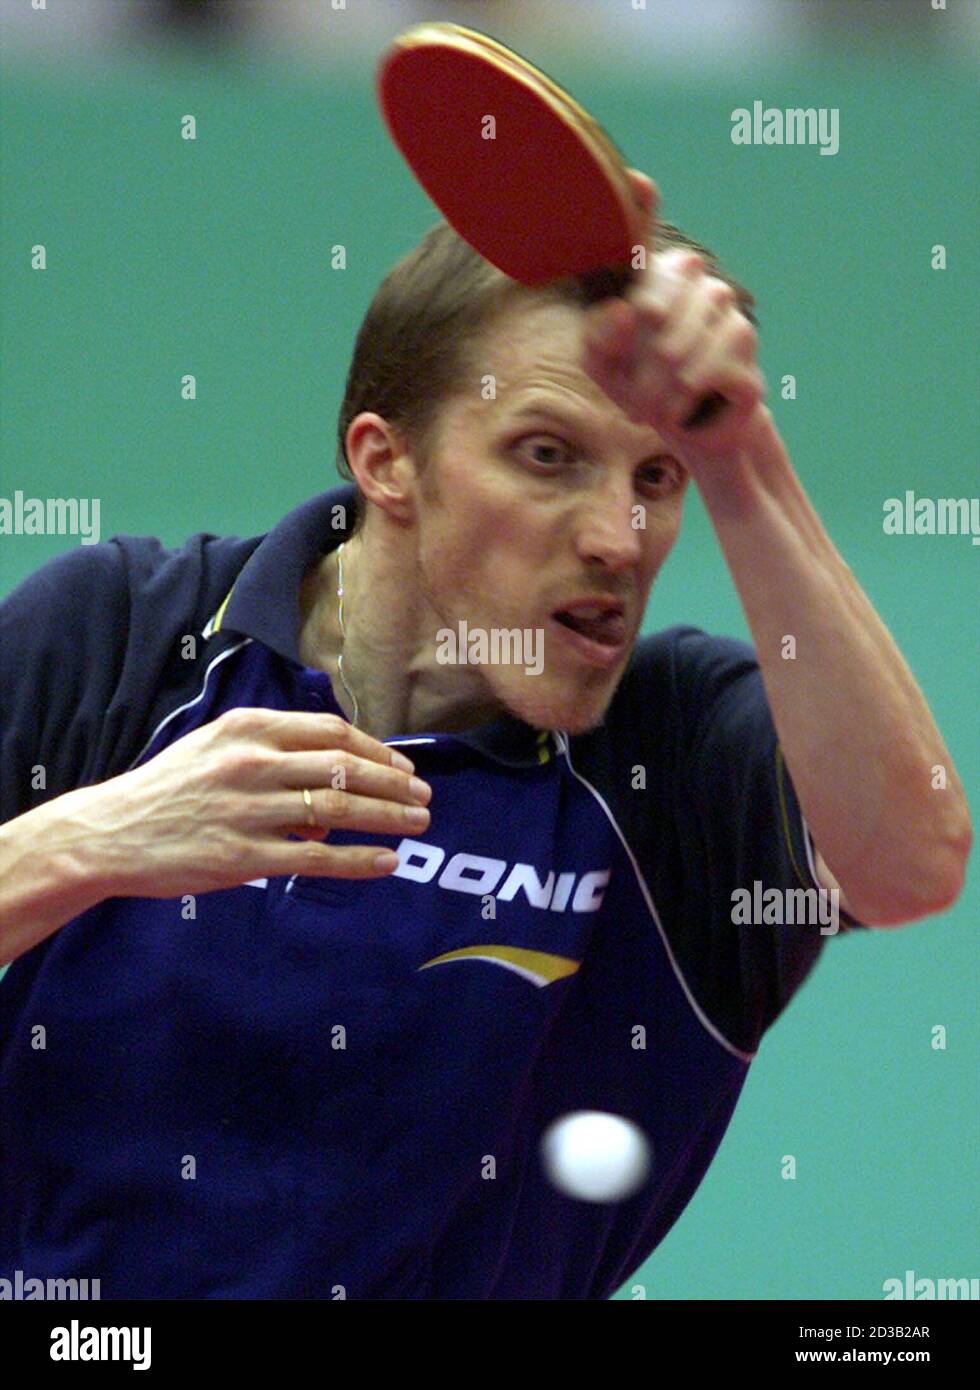 Joerg Rosskopf of Germany smashes against China's Ma Lin during the fourth  round of the men's singles of the World Table Tennis Championships in  Osaka, Japan May 4, 2001. Rosskopf was defeated